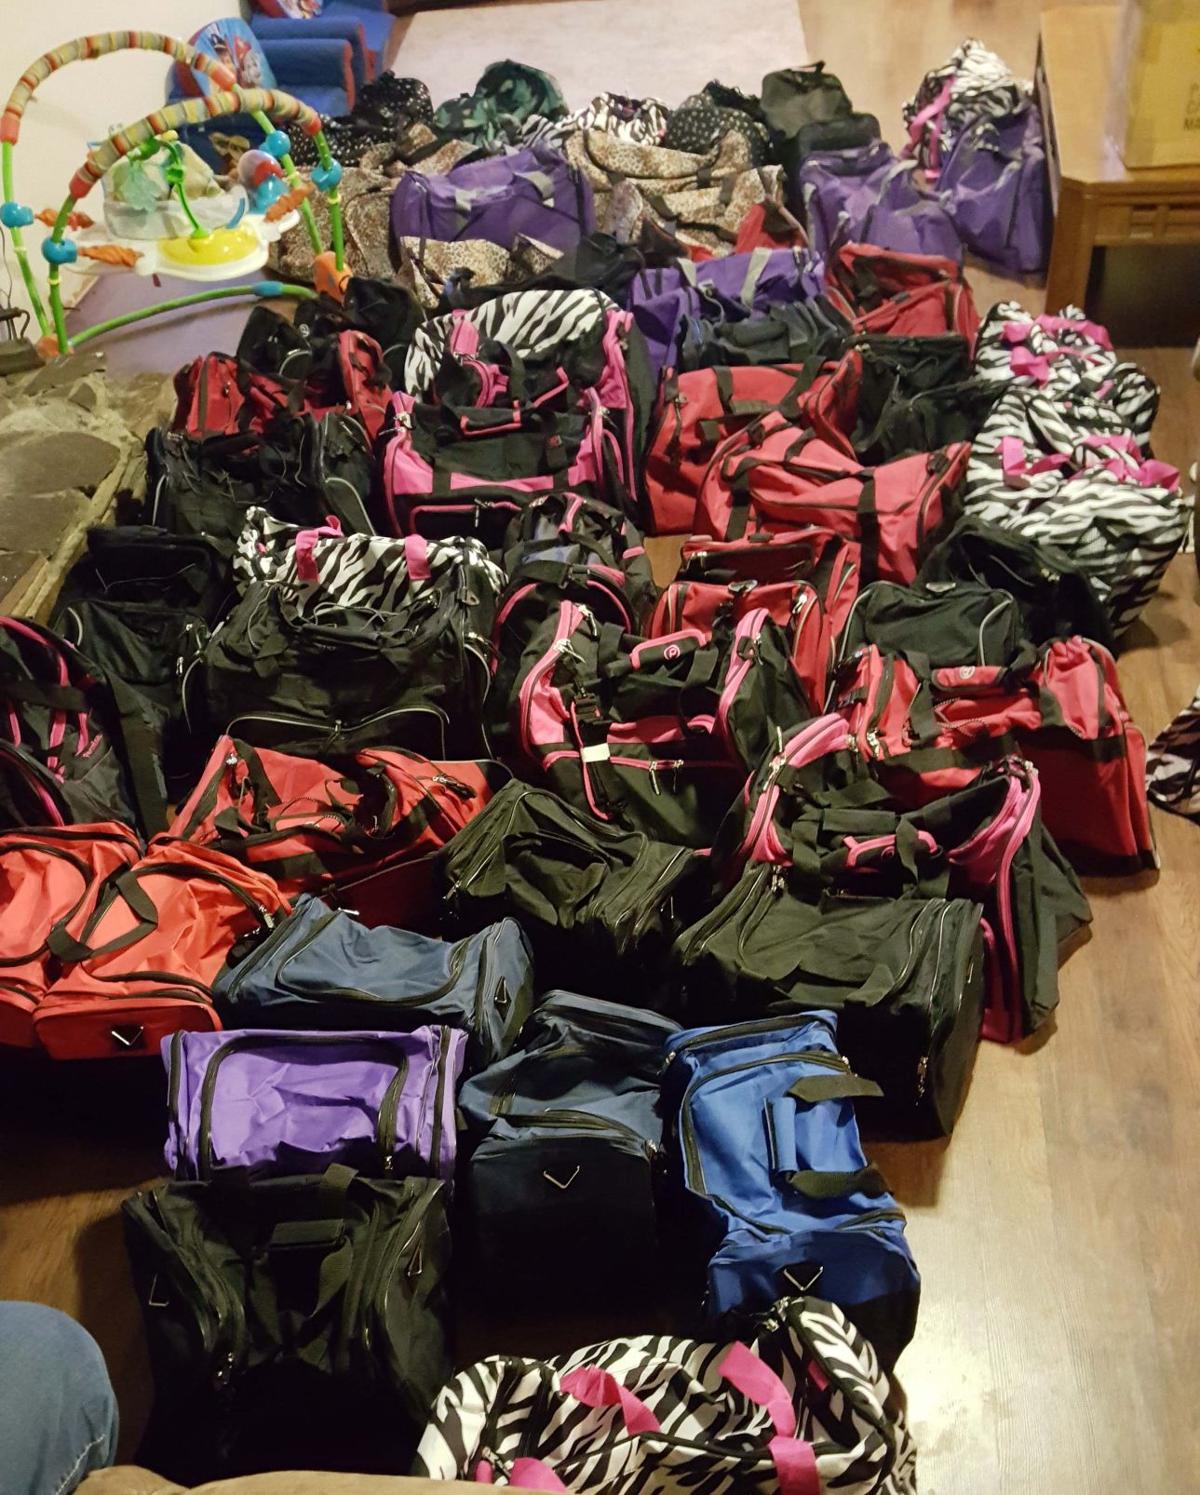 Duffle bags for foster kids a much-needed item | Local News | www.bagssaleusa.com